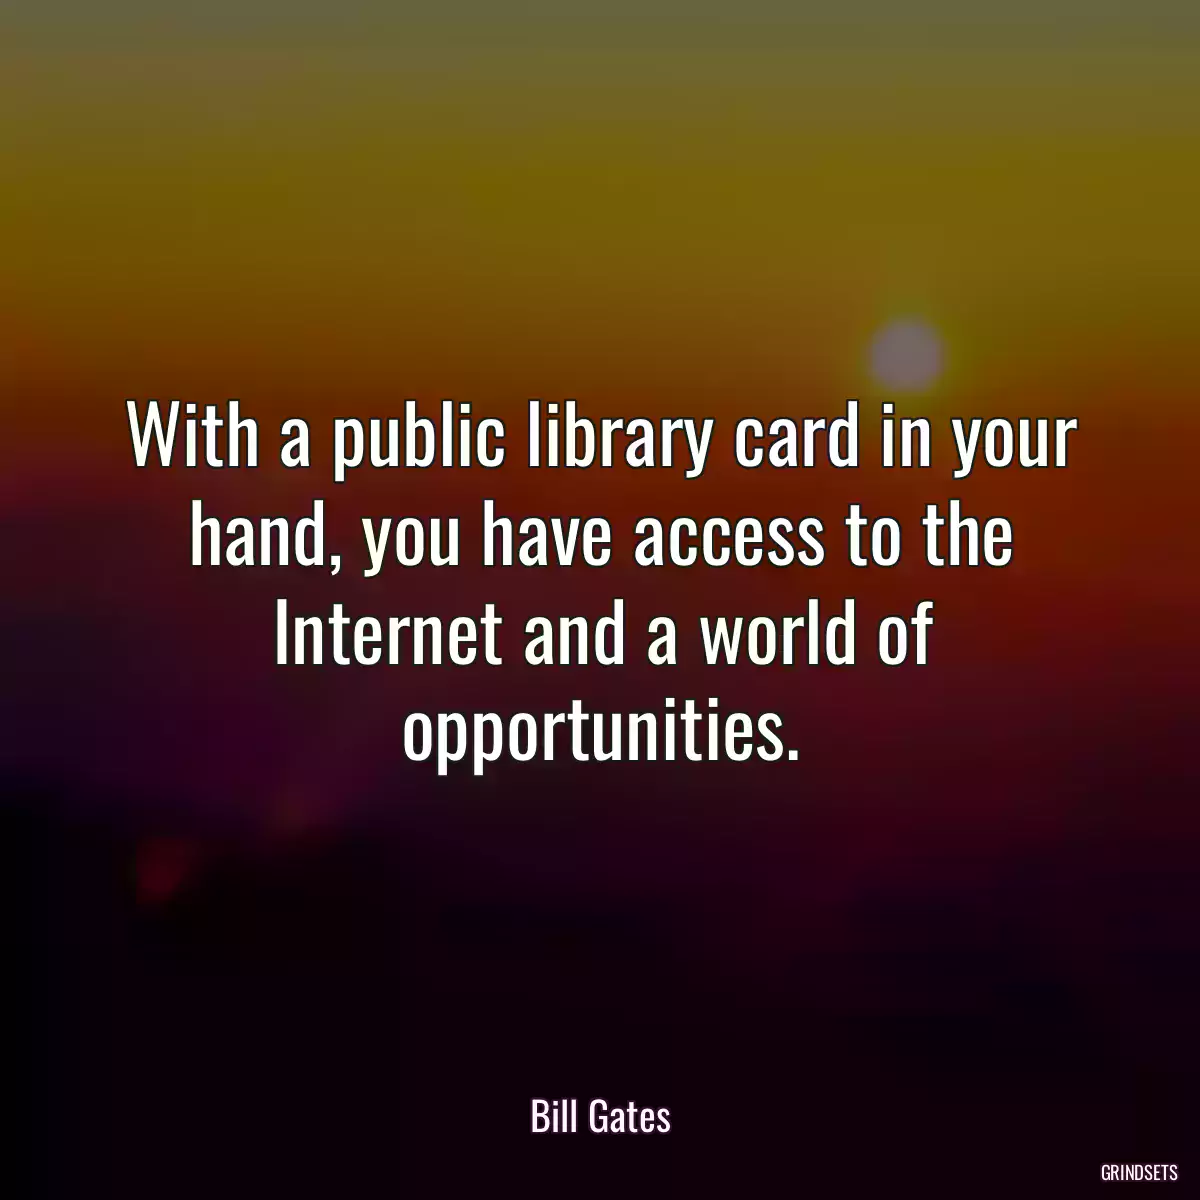 With a public library card in your hand, you have access to the Internet and a world of opportunities.